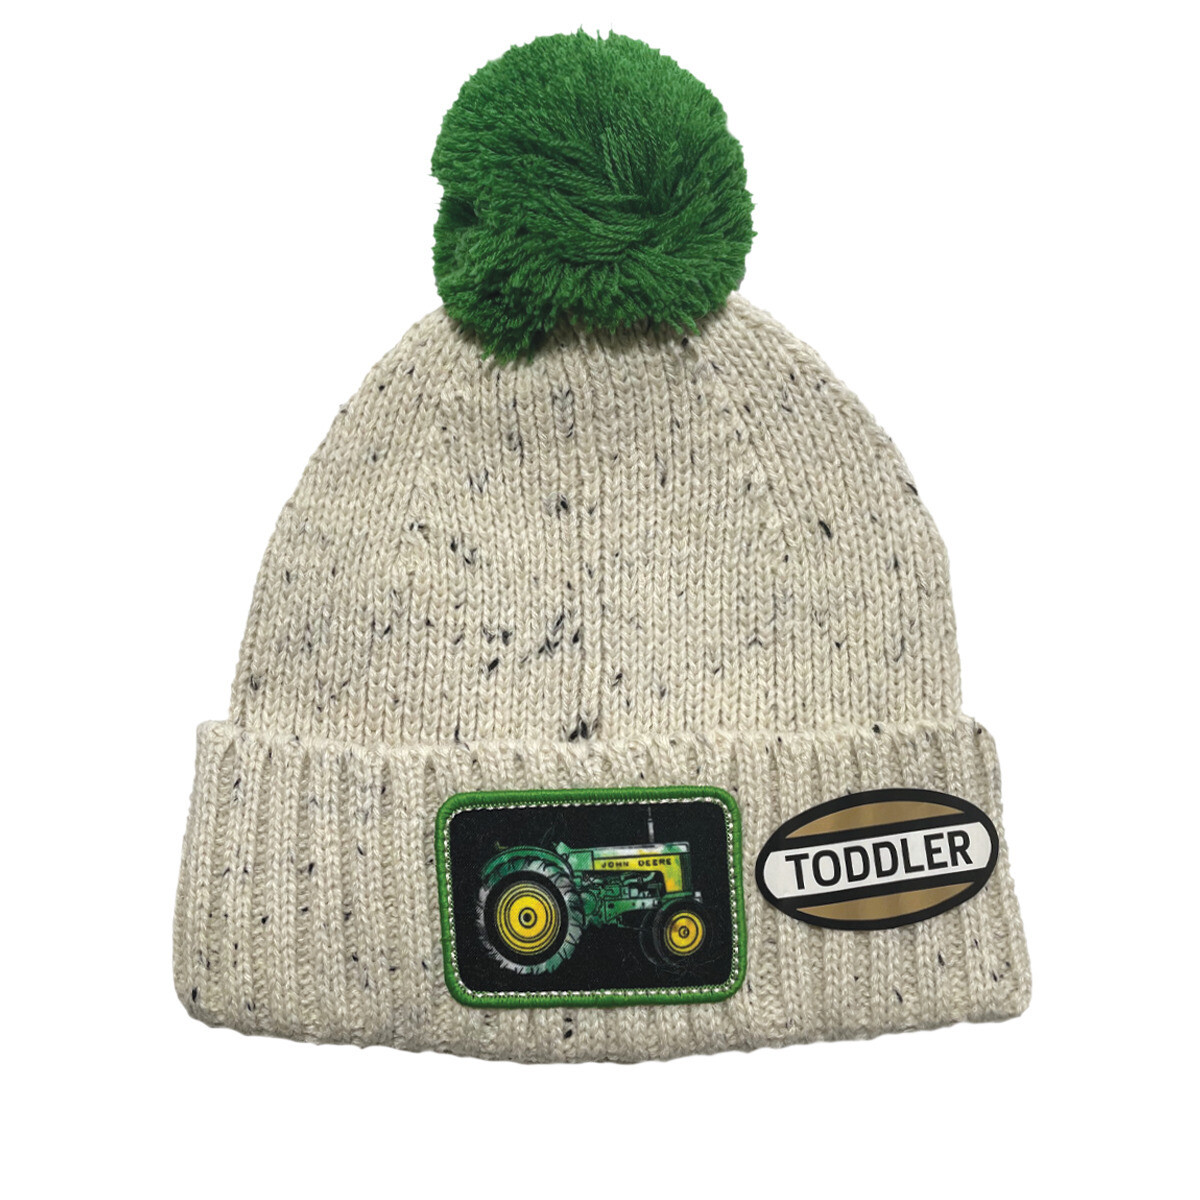 Pom & Tractor Patch Toddler Marled Beanie